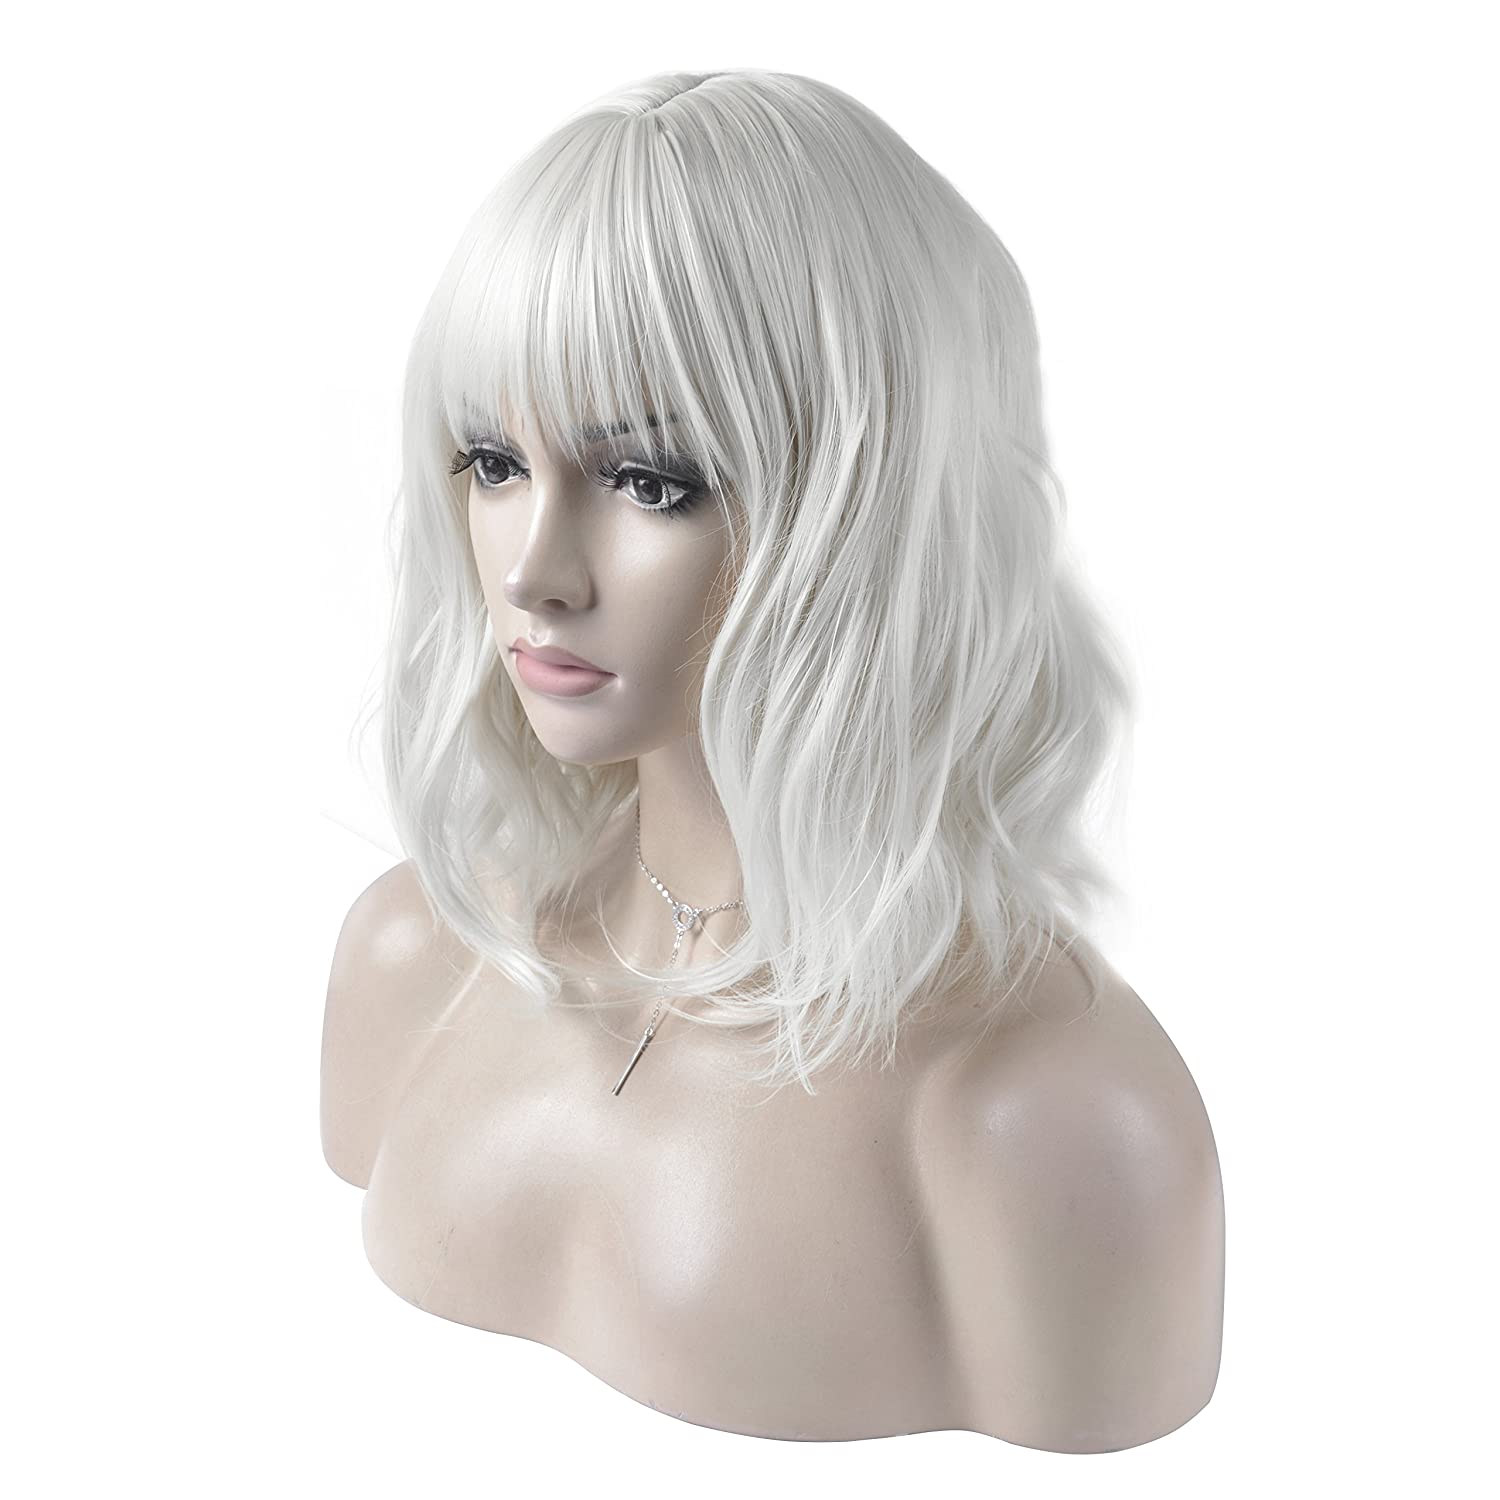 Price:$16.99     DAOTS 14 Inches Curly Wigs with Bangs for Women Girls Heat Resistant Synthetic Hair Wig (Silver White)   Beauty